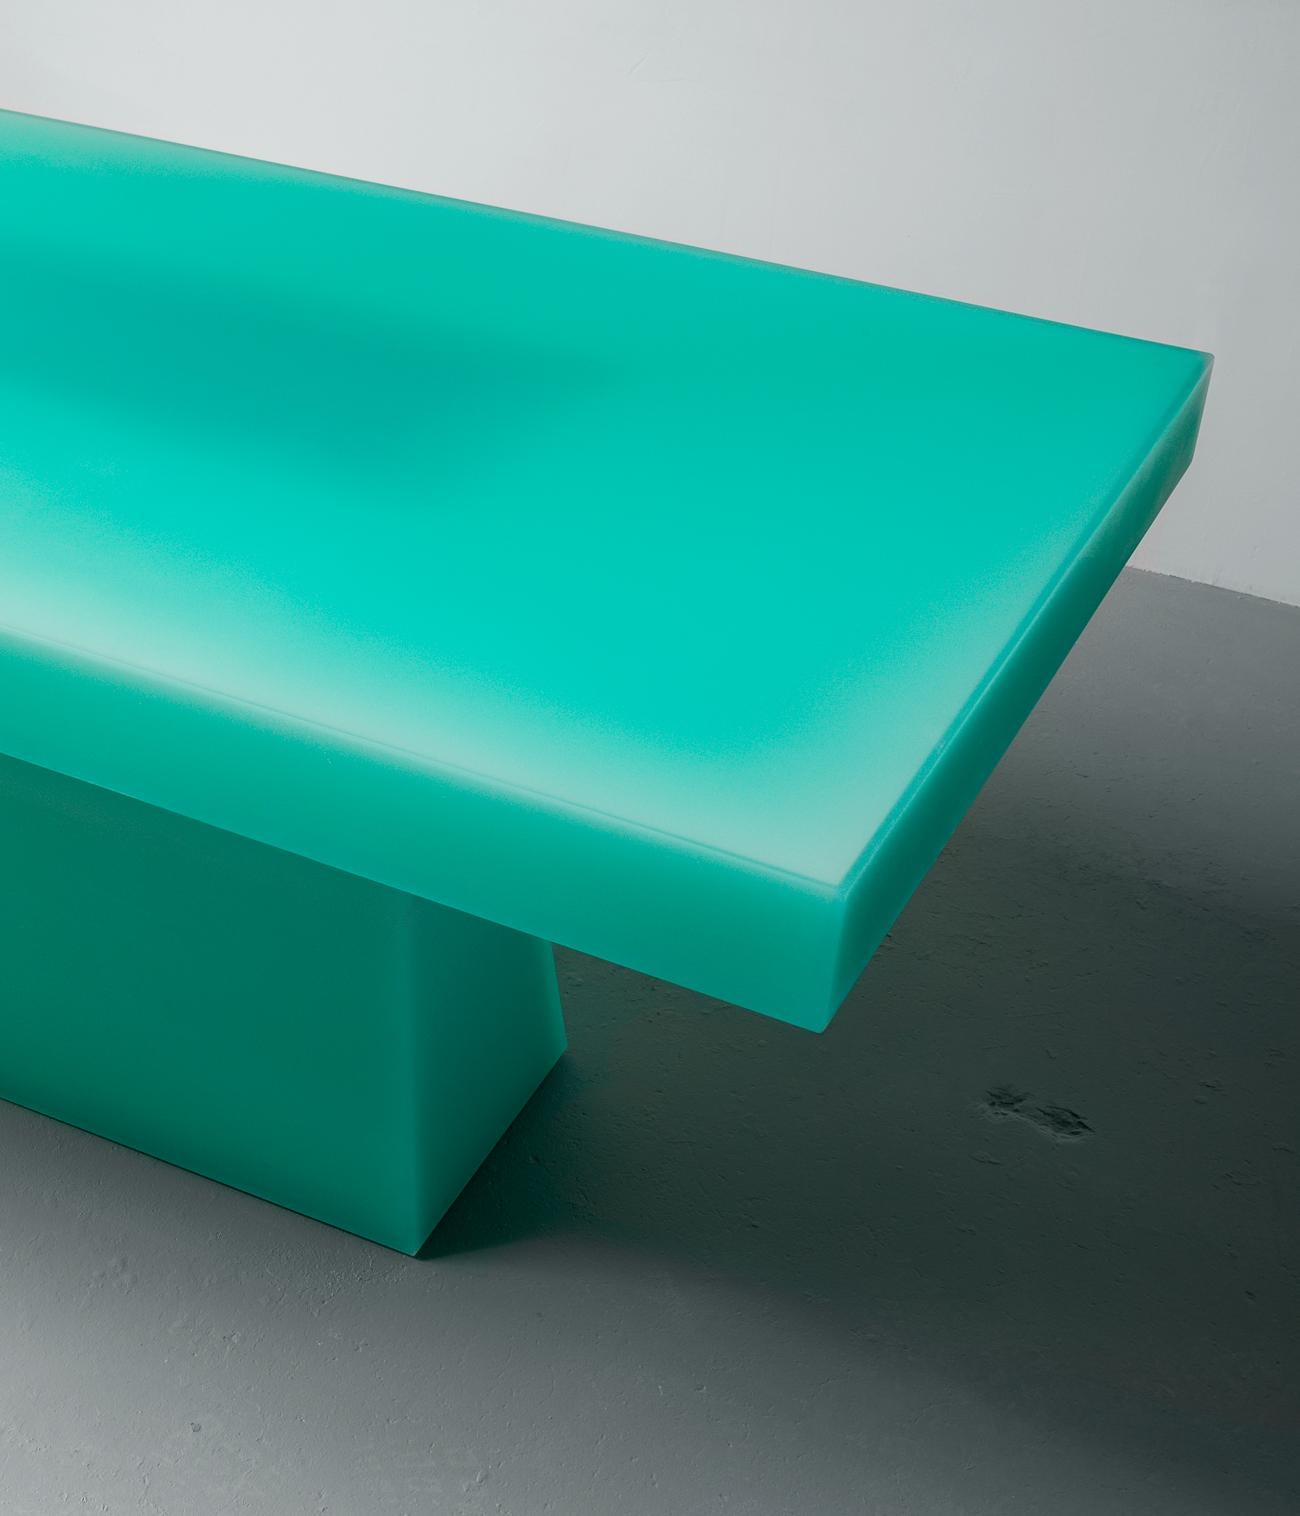 American Pool Resin Dining Table in Turquoise by Facture Studio, REP by Tuleste Factory For Sale